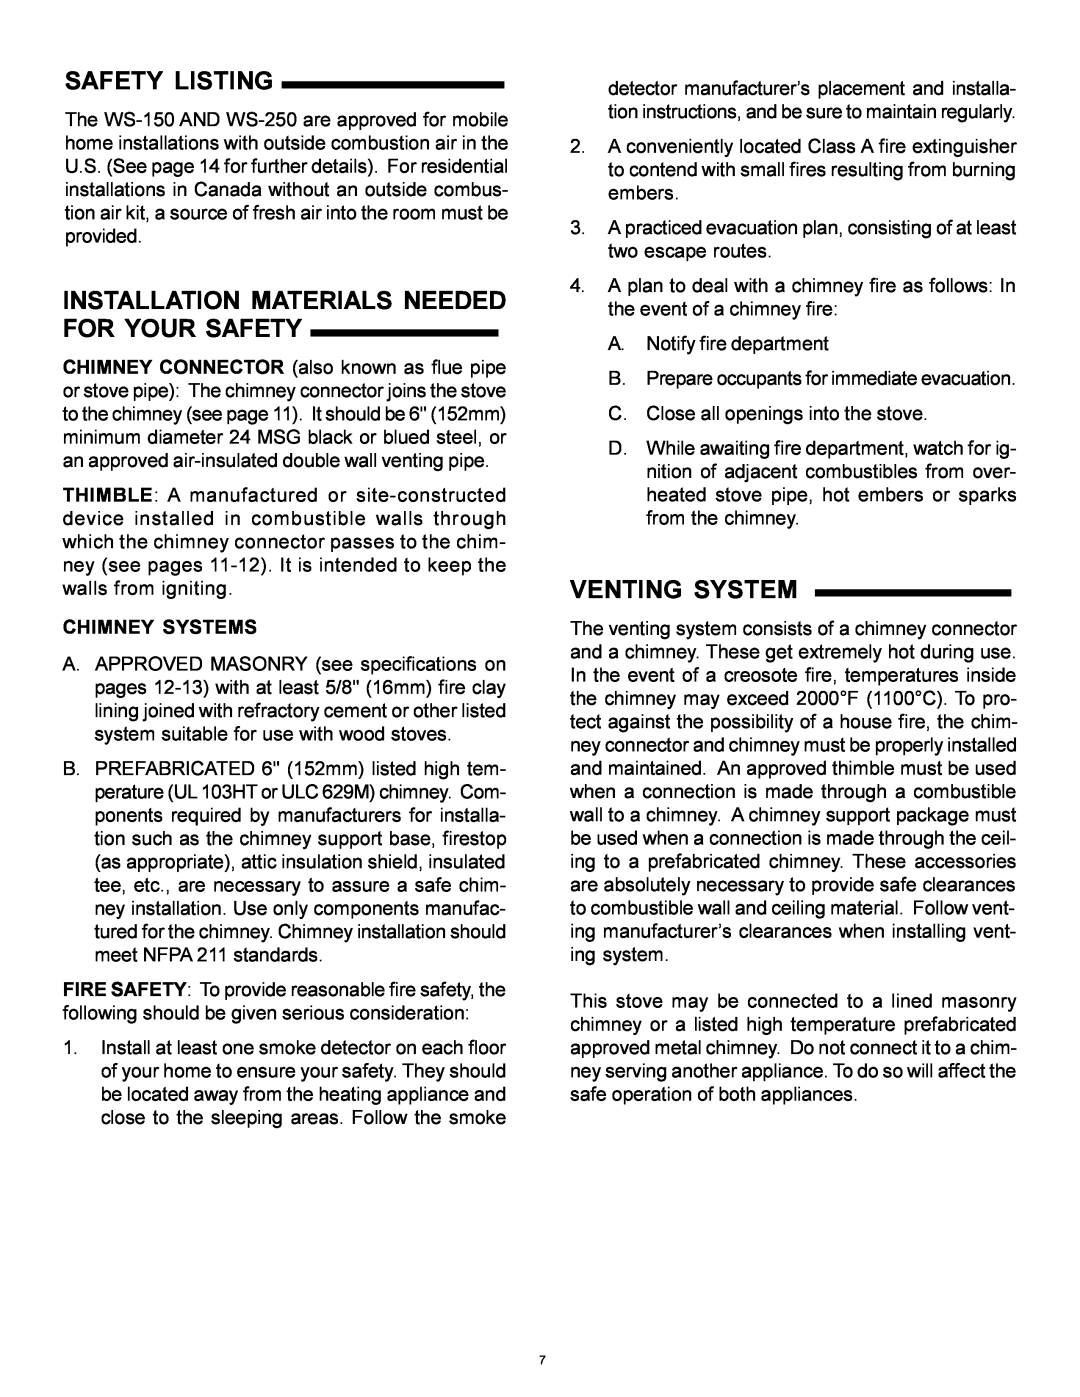 Heat & Glo LifeStyle WS-250 Safety Listing, Installation Materials Needed For Your Safety, Venting System, Chimney Systems 